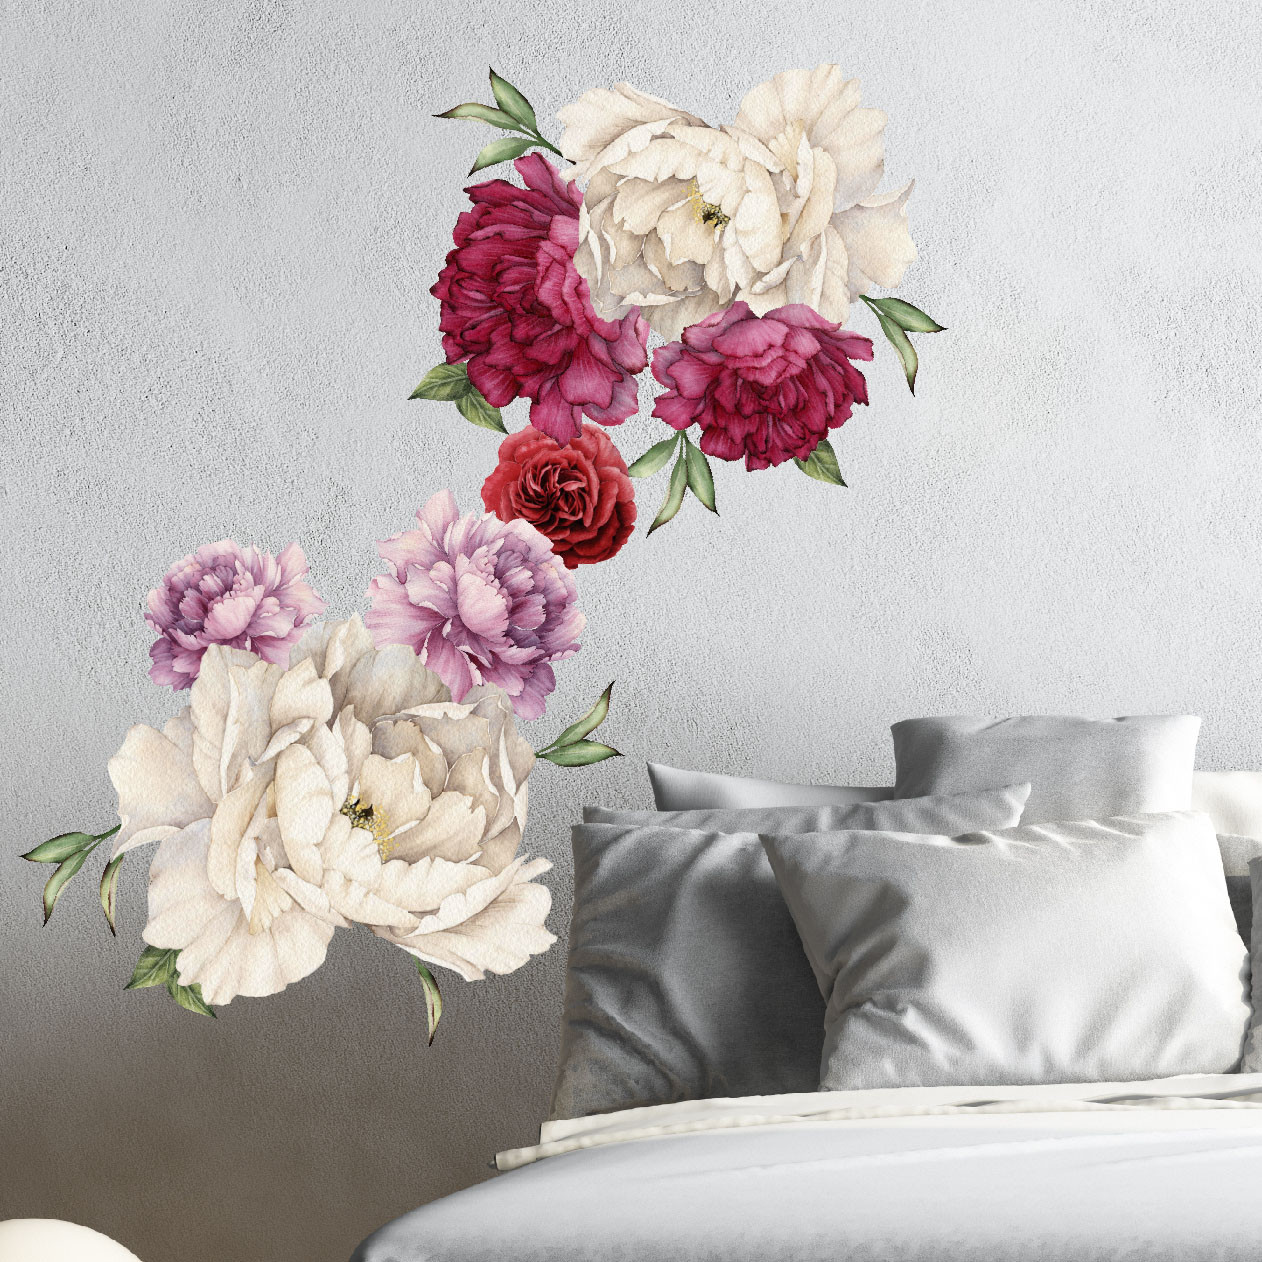 Peony Flowers Luxury Wall Stickers Art Home Decor PVC Removable Vinyl Decal FBB